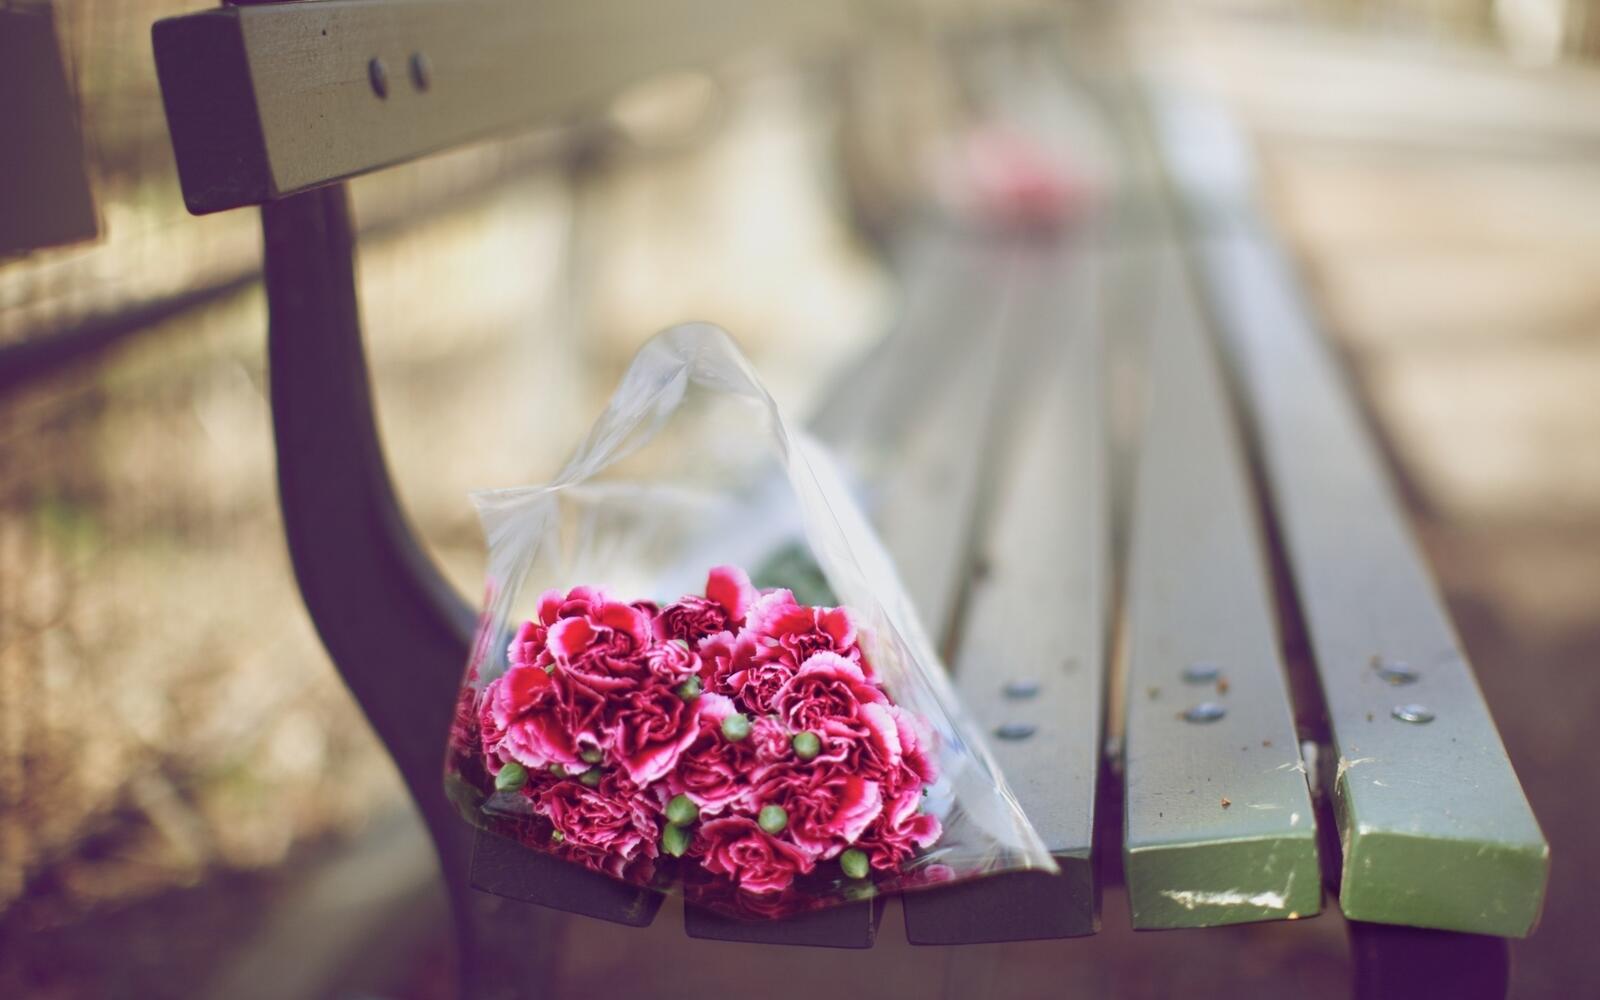 Wallpapers park wallpaper bouquet on bench pink carnations on the desktop